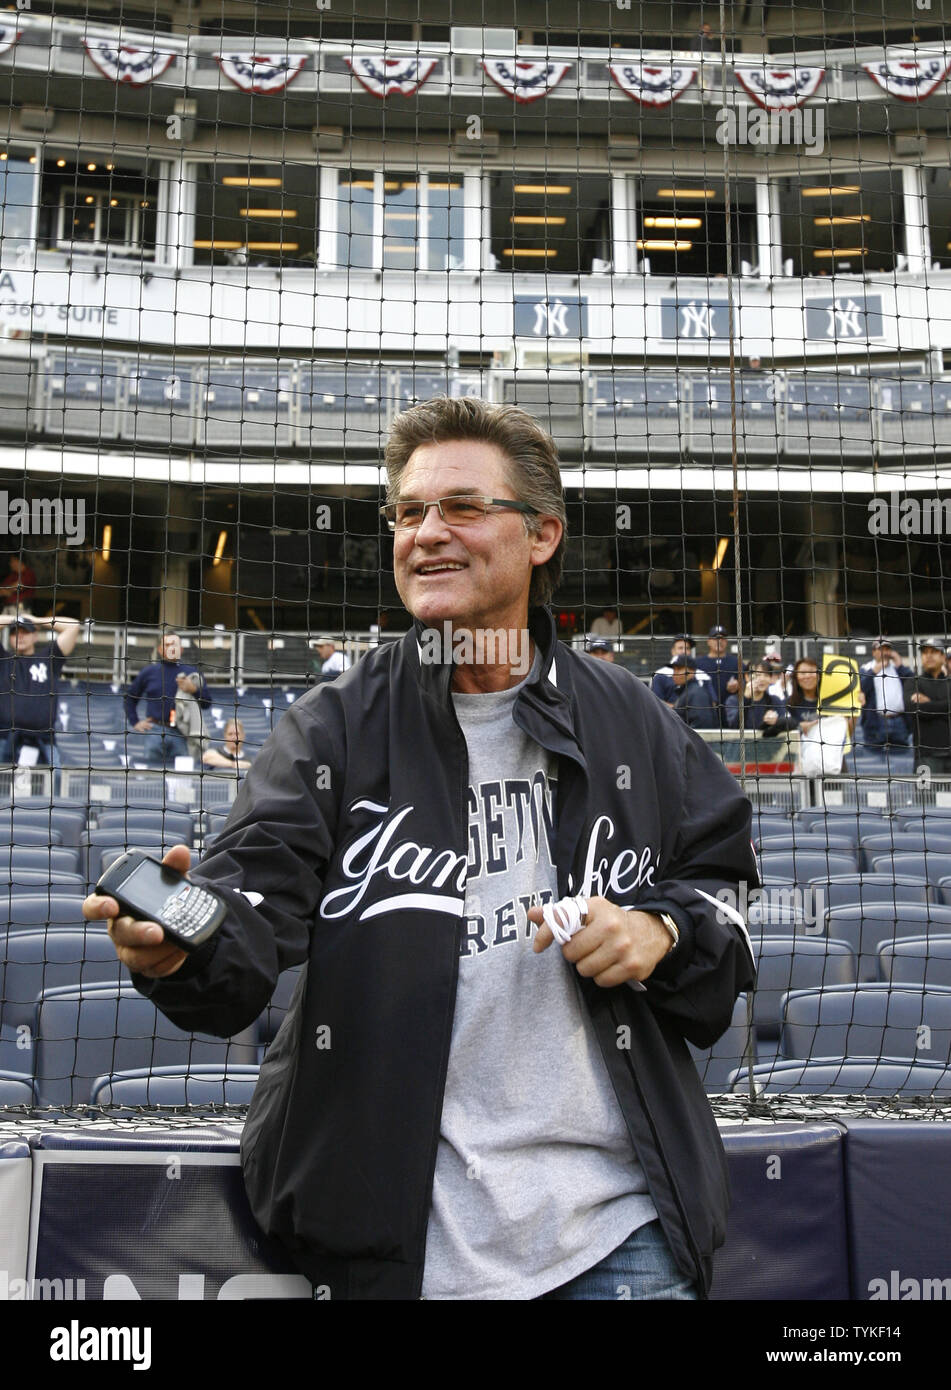 Actor Kurt Russell watches batting practice before the New York Yankees  play game 2 of the ALDS against the Minnesota Twins at Yankee Stadium in  New York City on October 9, 2009.